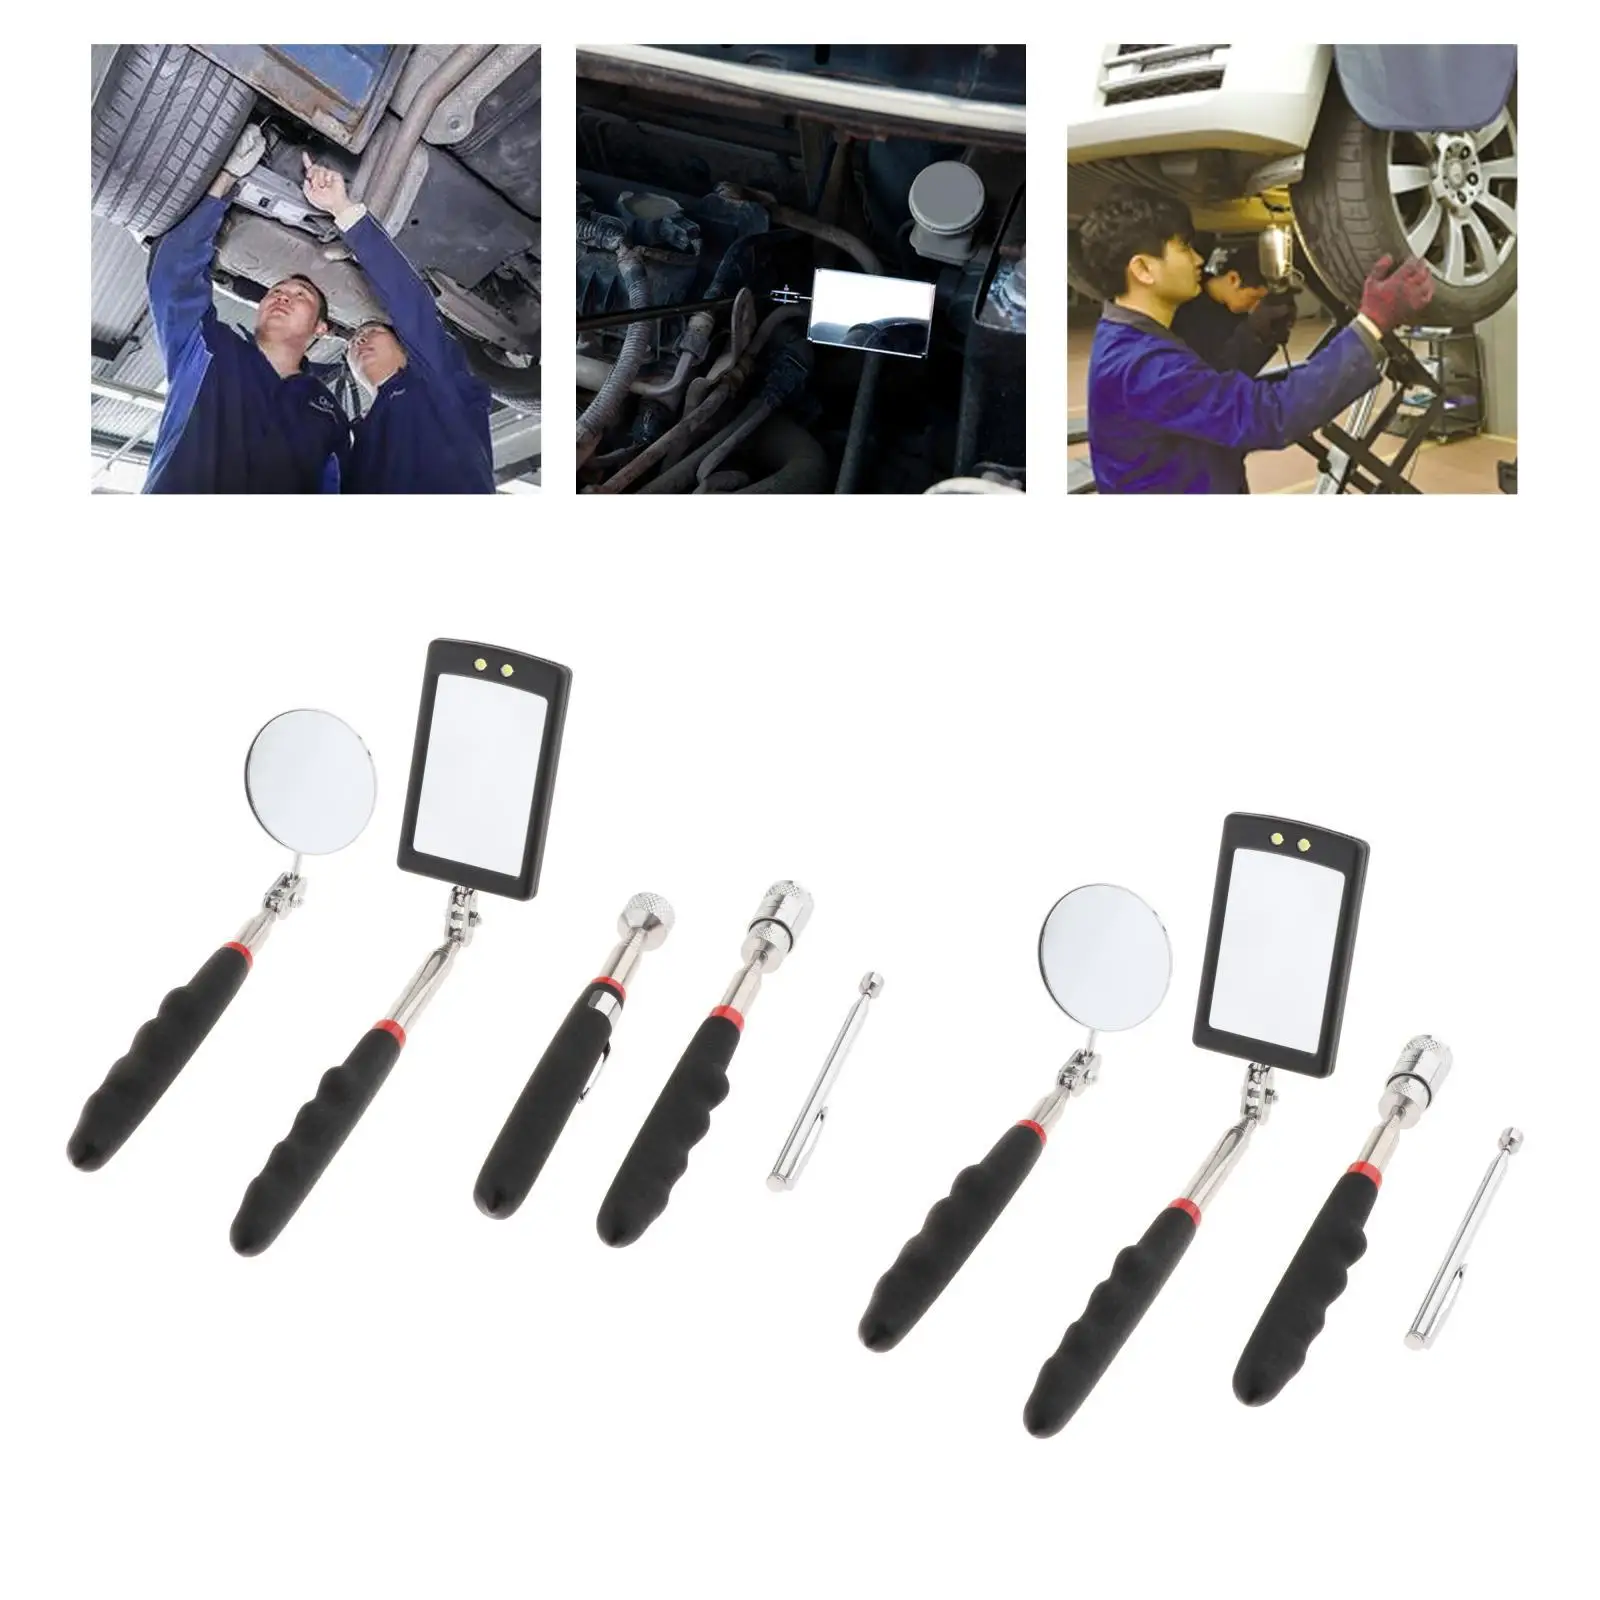 Magnetic Pick-Up Grabber Tool Telescoping Handle Hand Tool with Pick up Rod with Handle Portable Fit for Car Maintenance